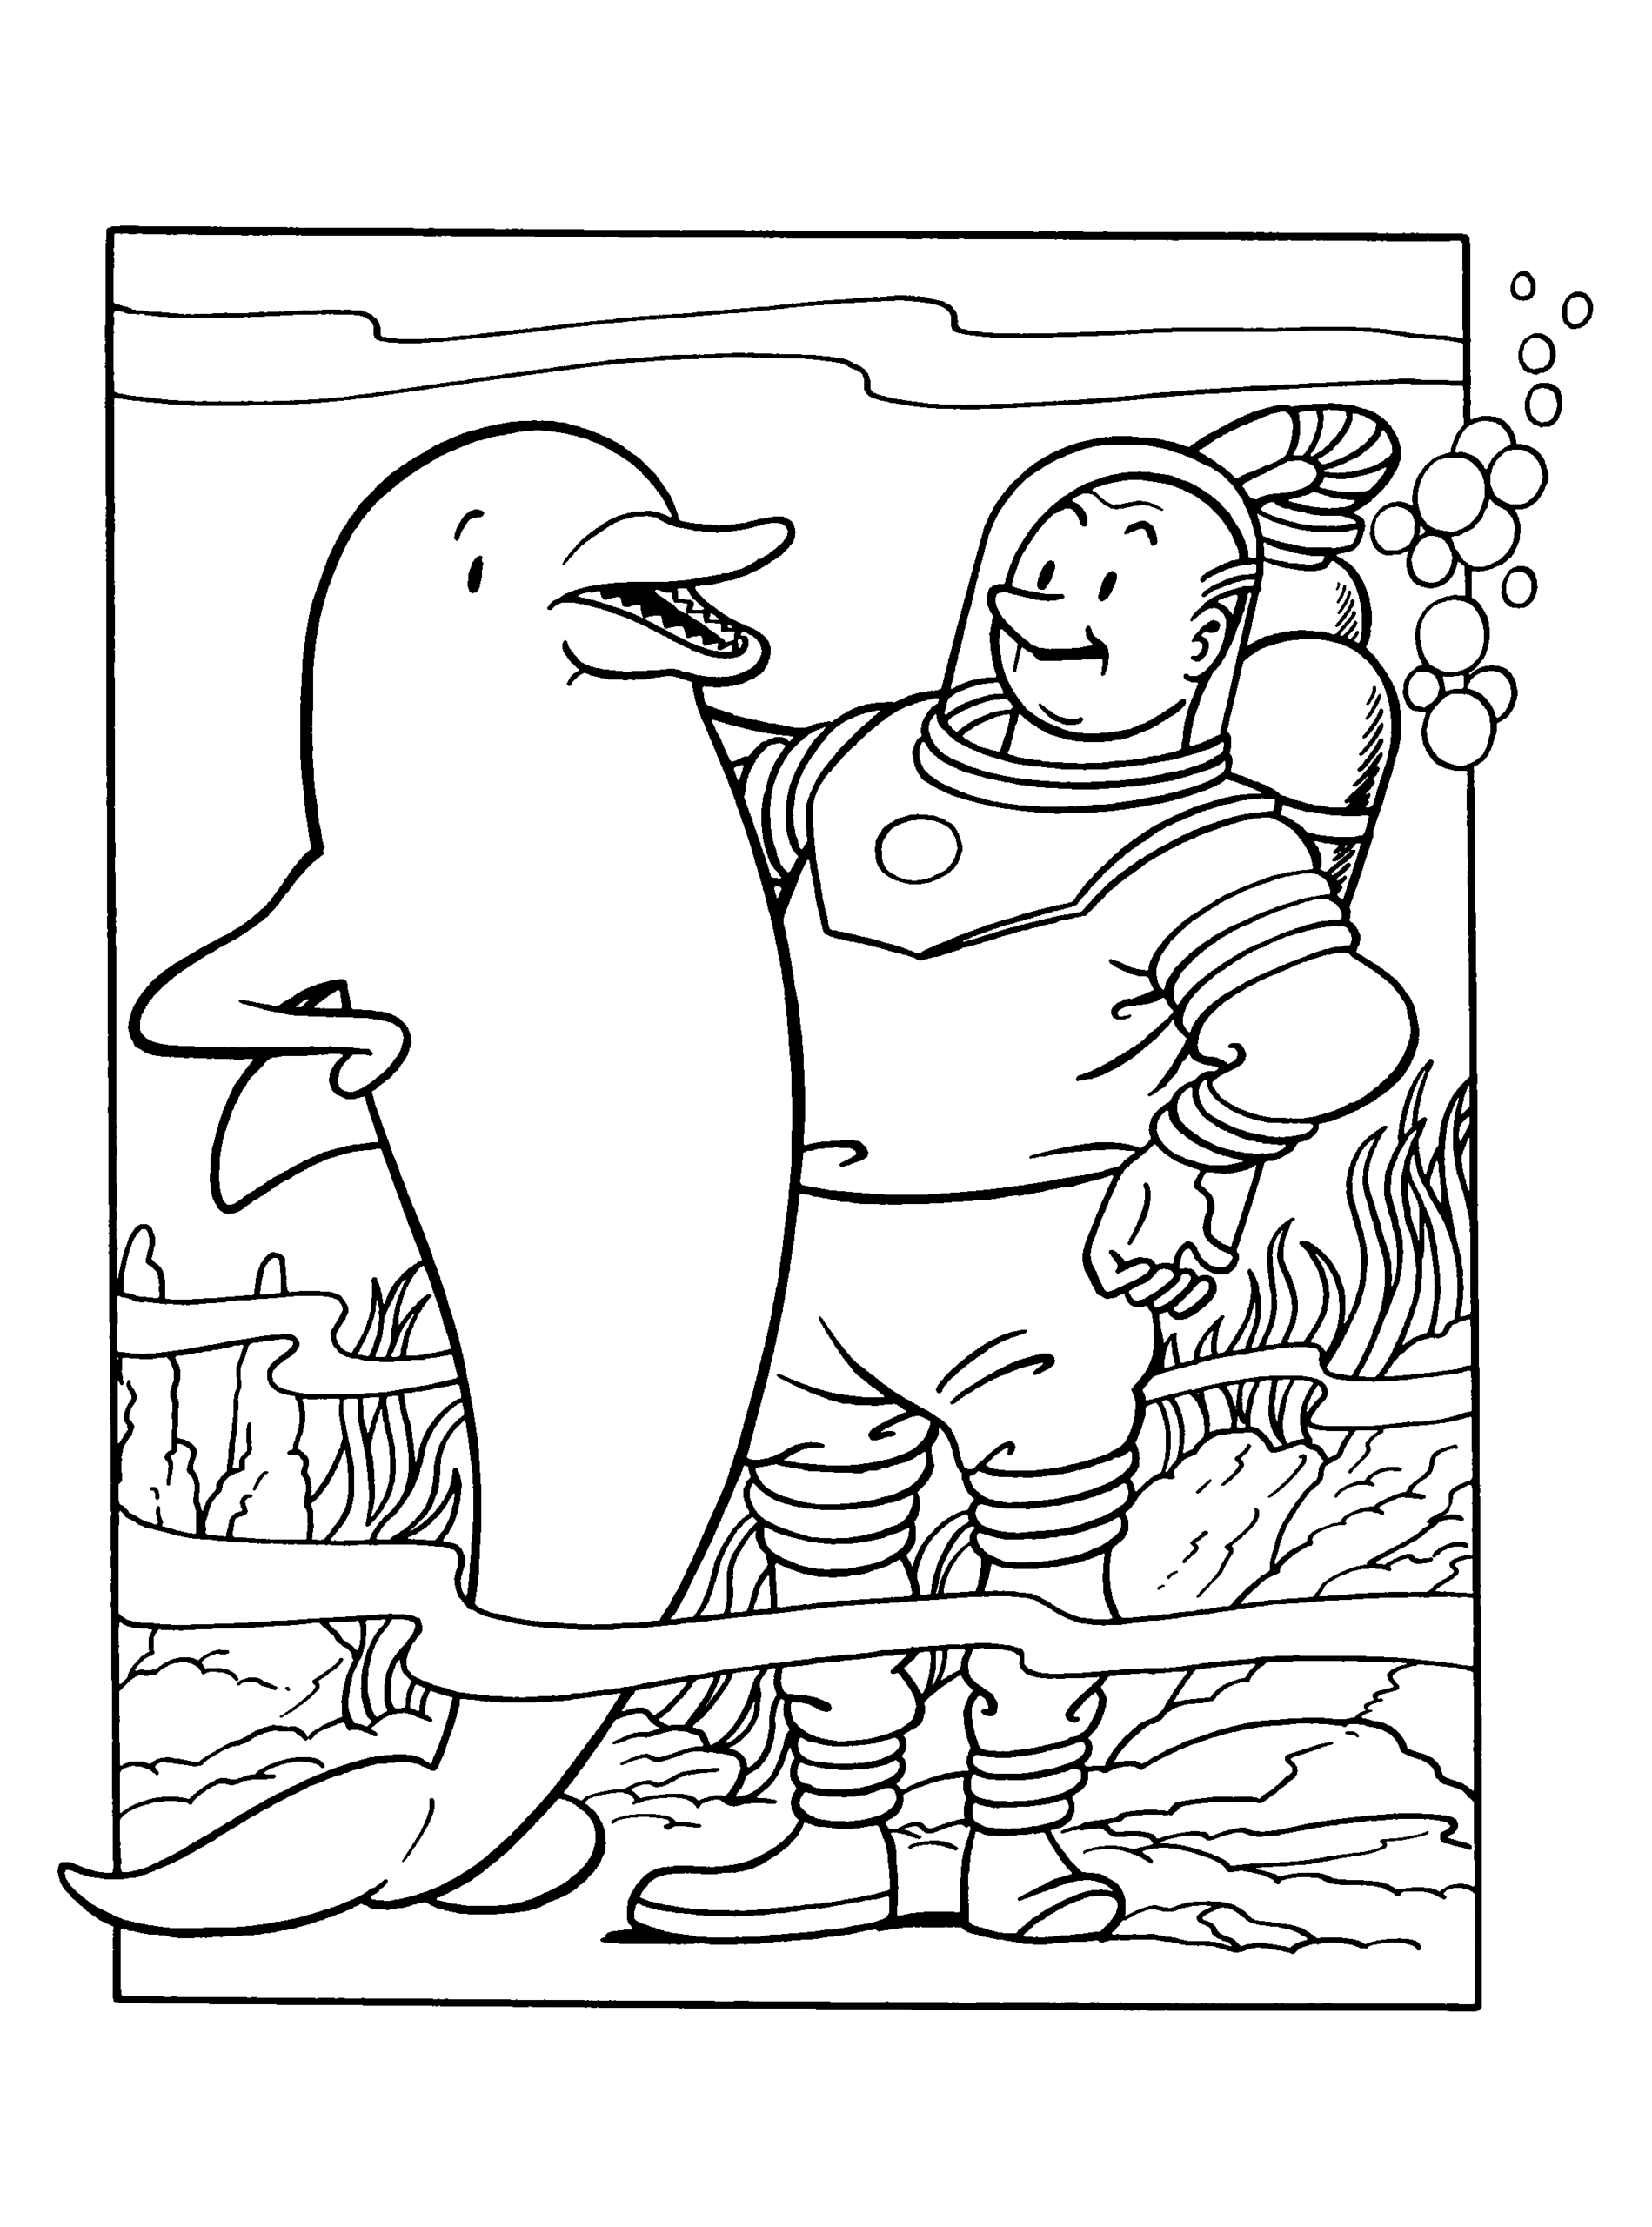 Spike and Suzy Coloring Pages Cartoons spike and suzy 42 Printable 2020 5929 Coloring4free